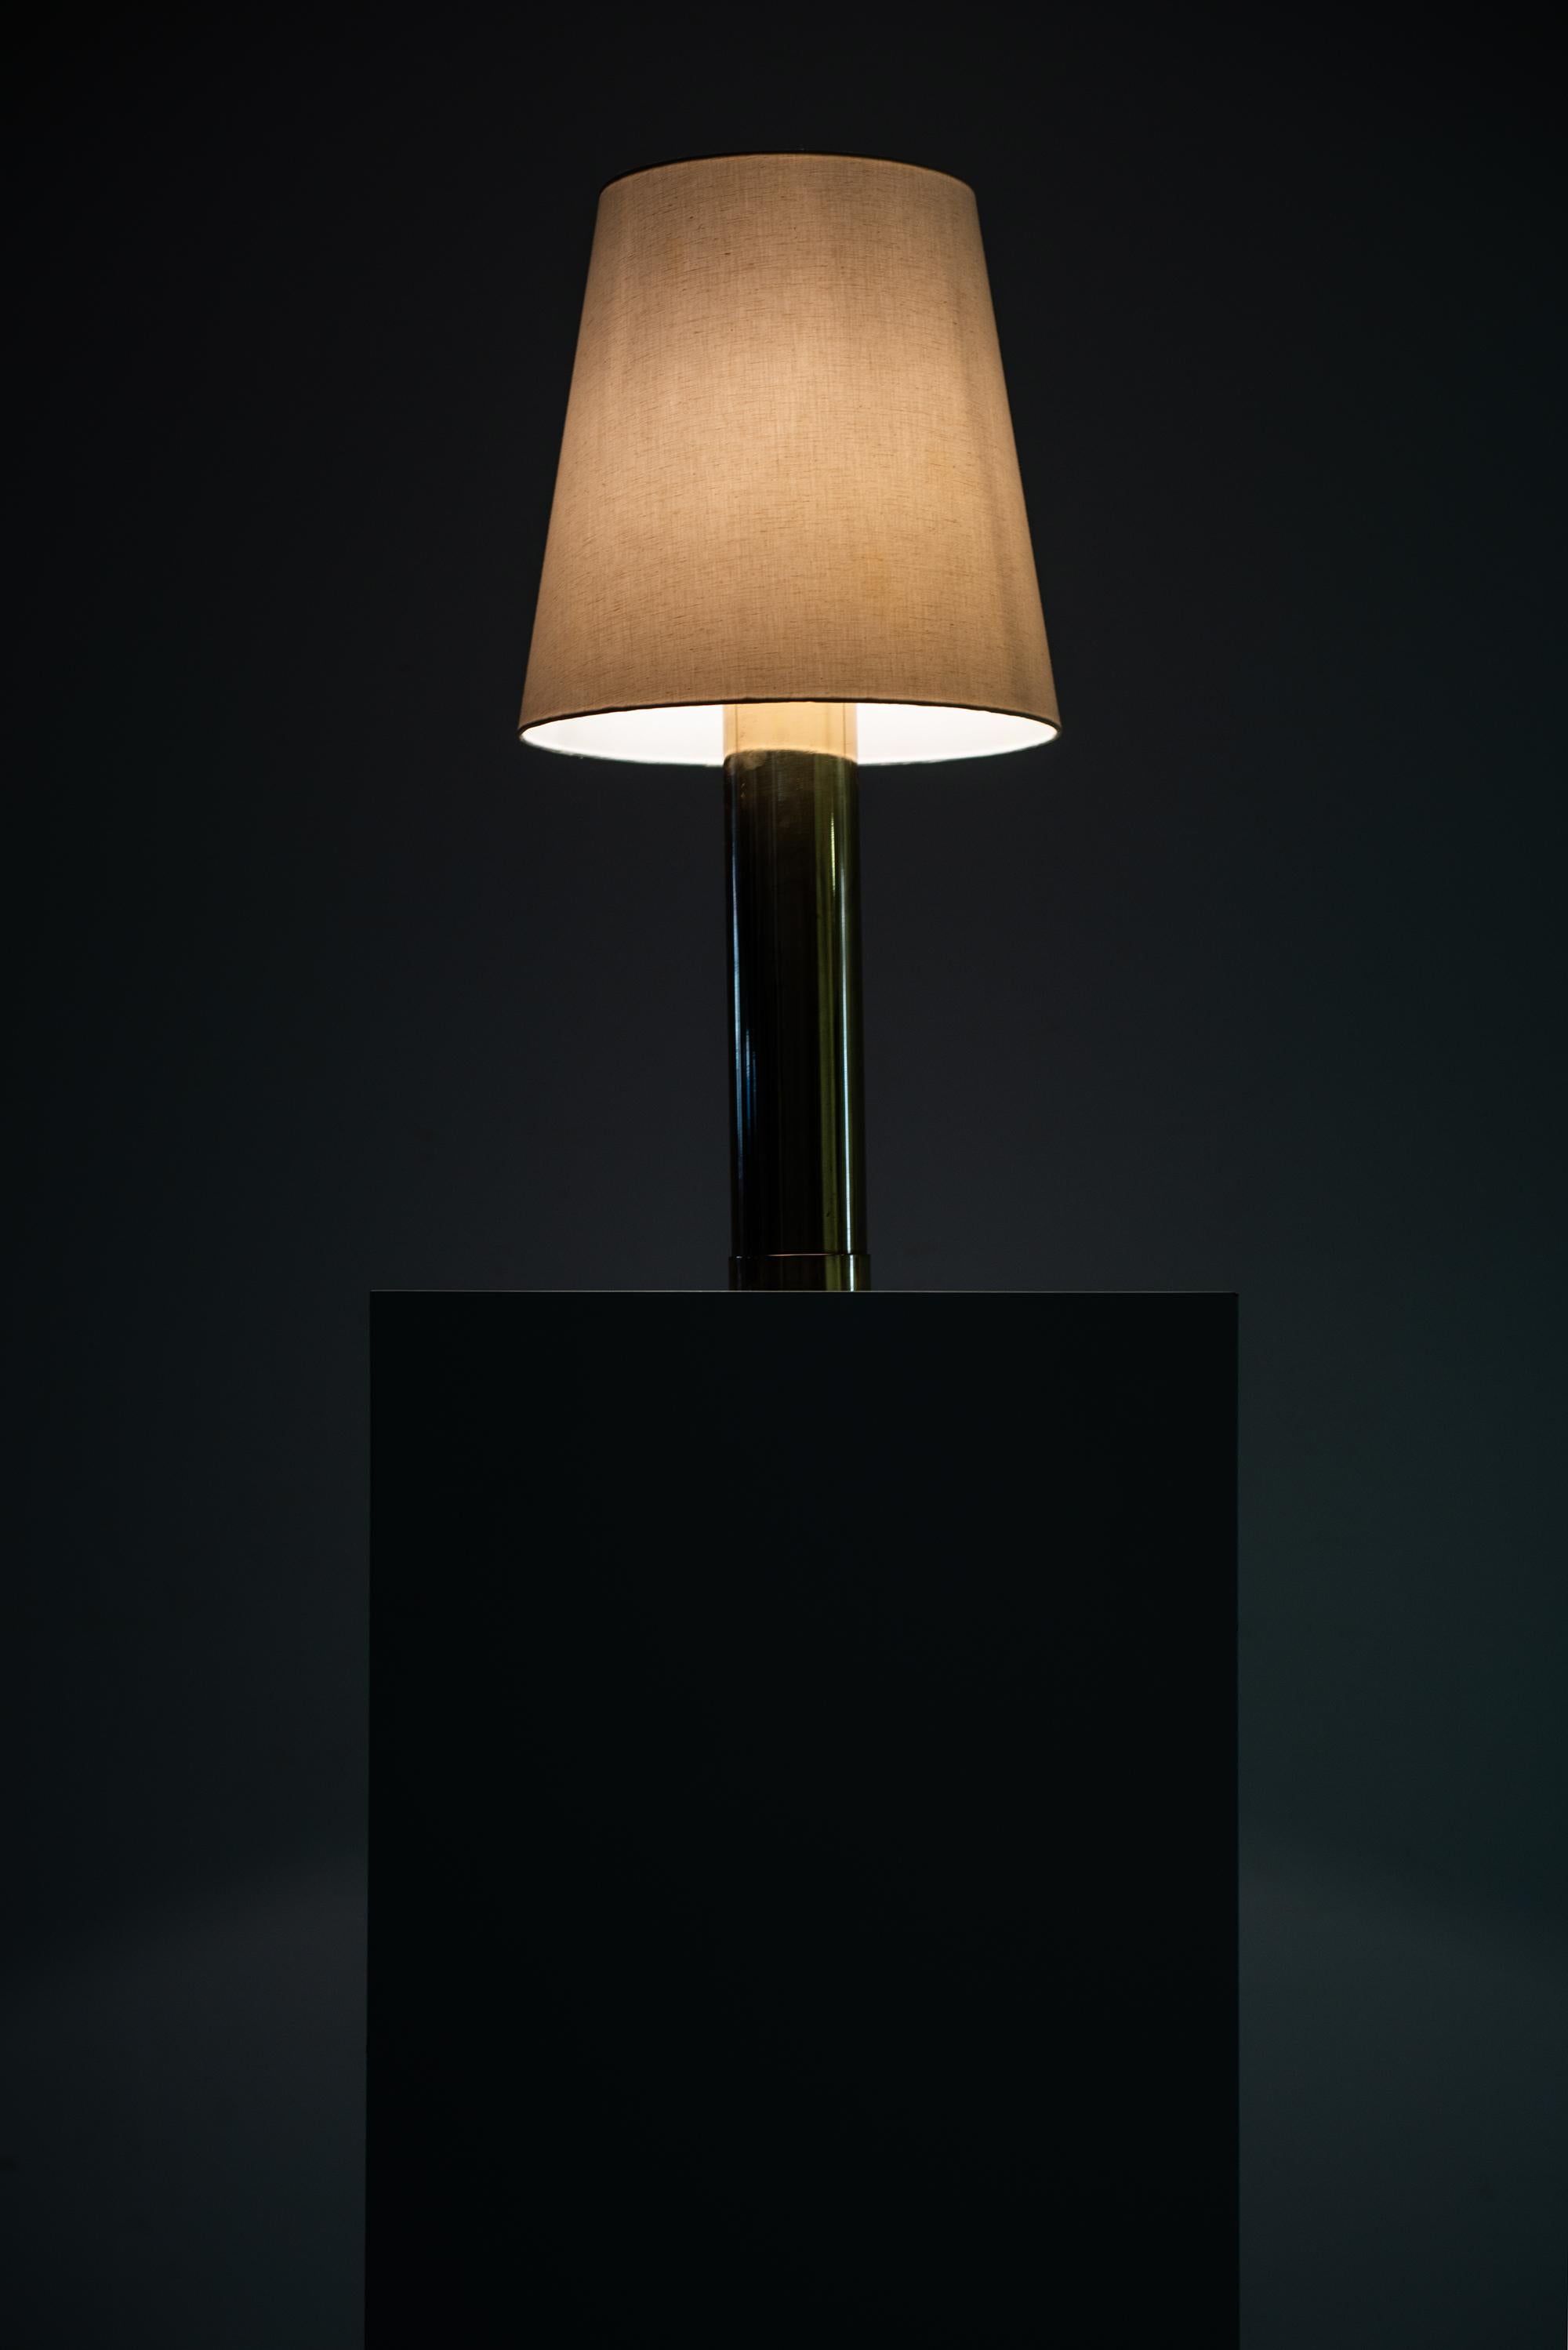 Table Lamps Model B-010 Produced by Bergboms in Sweden In Good Condition For Sale In Limhamn, Skåne län